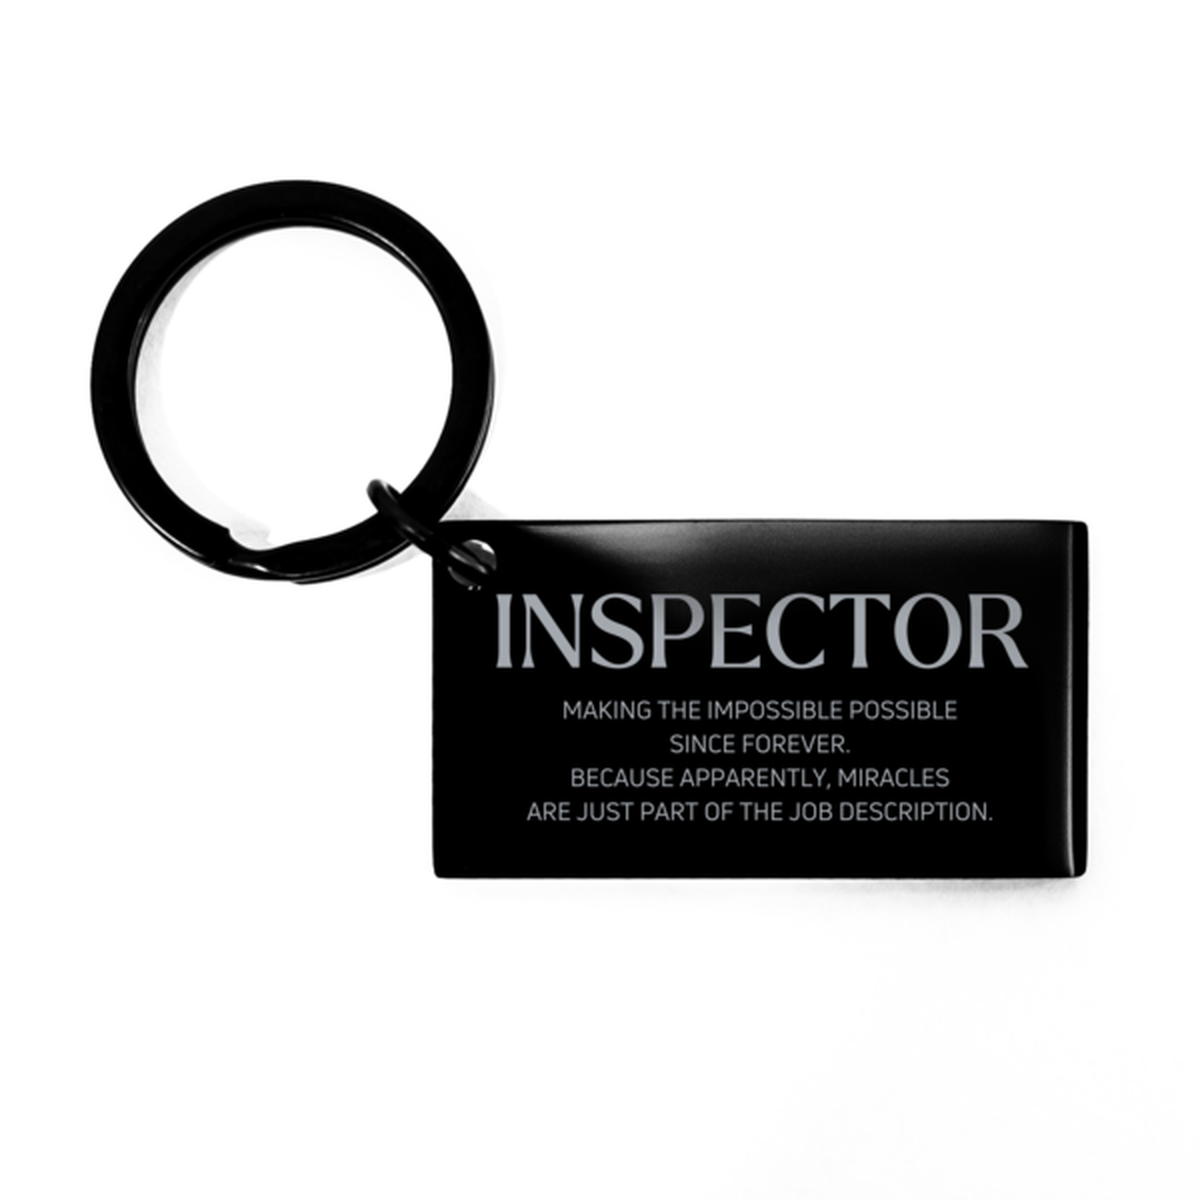 Funny Inspector Gifts, Miracles are just part of the job description, Inspirational Birthday Keychain For Inspector, Men, Women, Coworkers, Friends, Boss